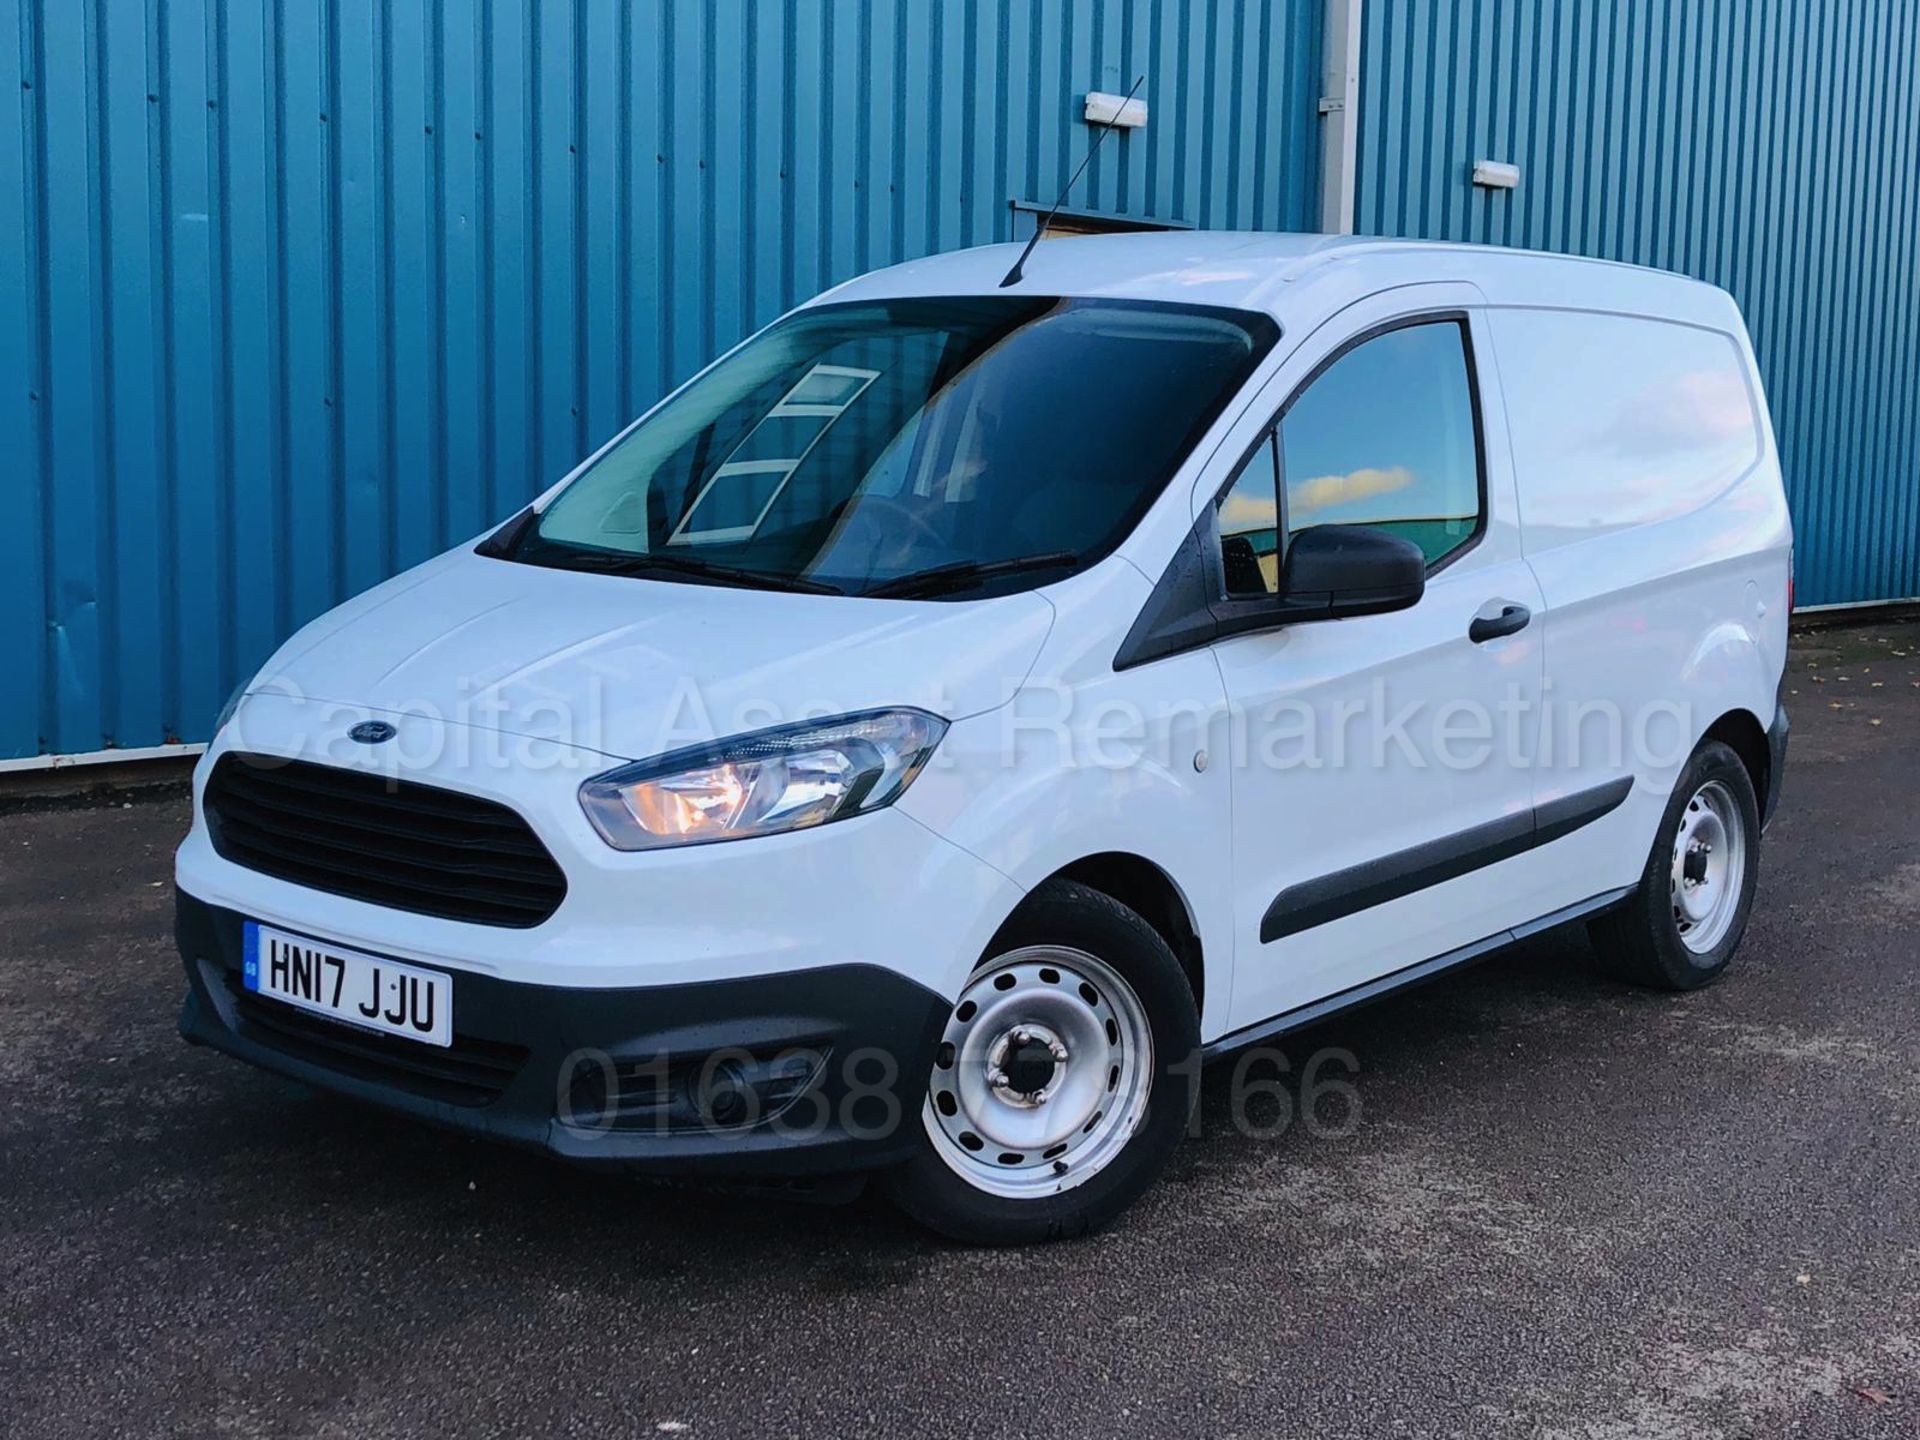 FORD TRANSIT COURIER 'PANEL VAN' *BASE EDITION* (2017) '1.5 TDCI - 75 BHP - 5 SPEED' (1 OWNER)